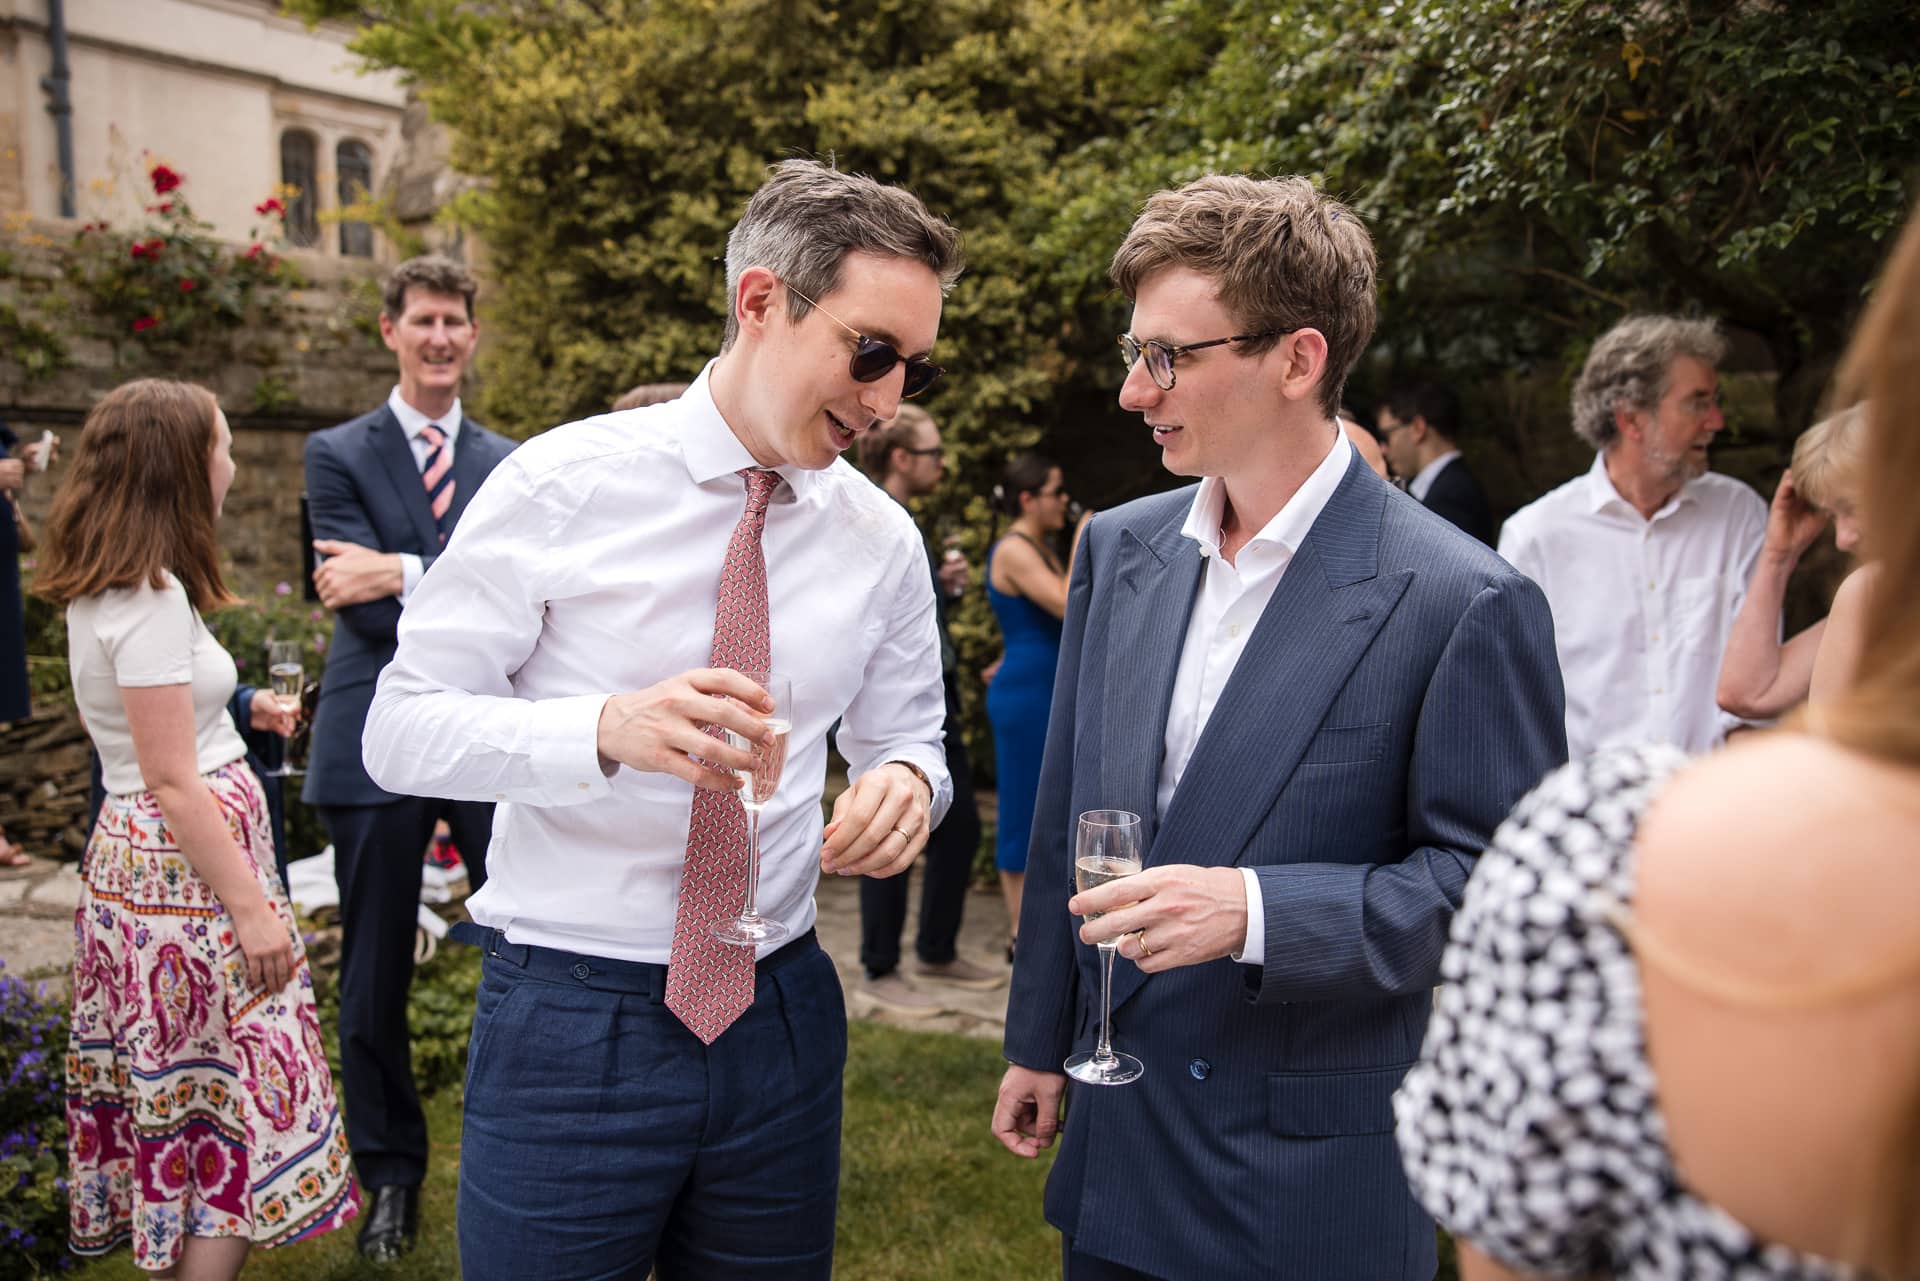 The Groom talking to a guest in the Masters Garden at Pembroke College